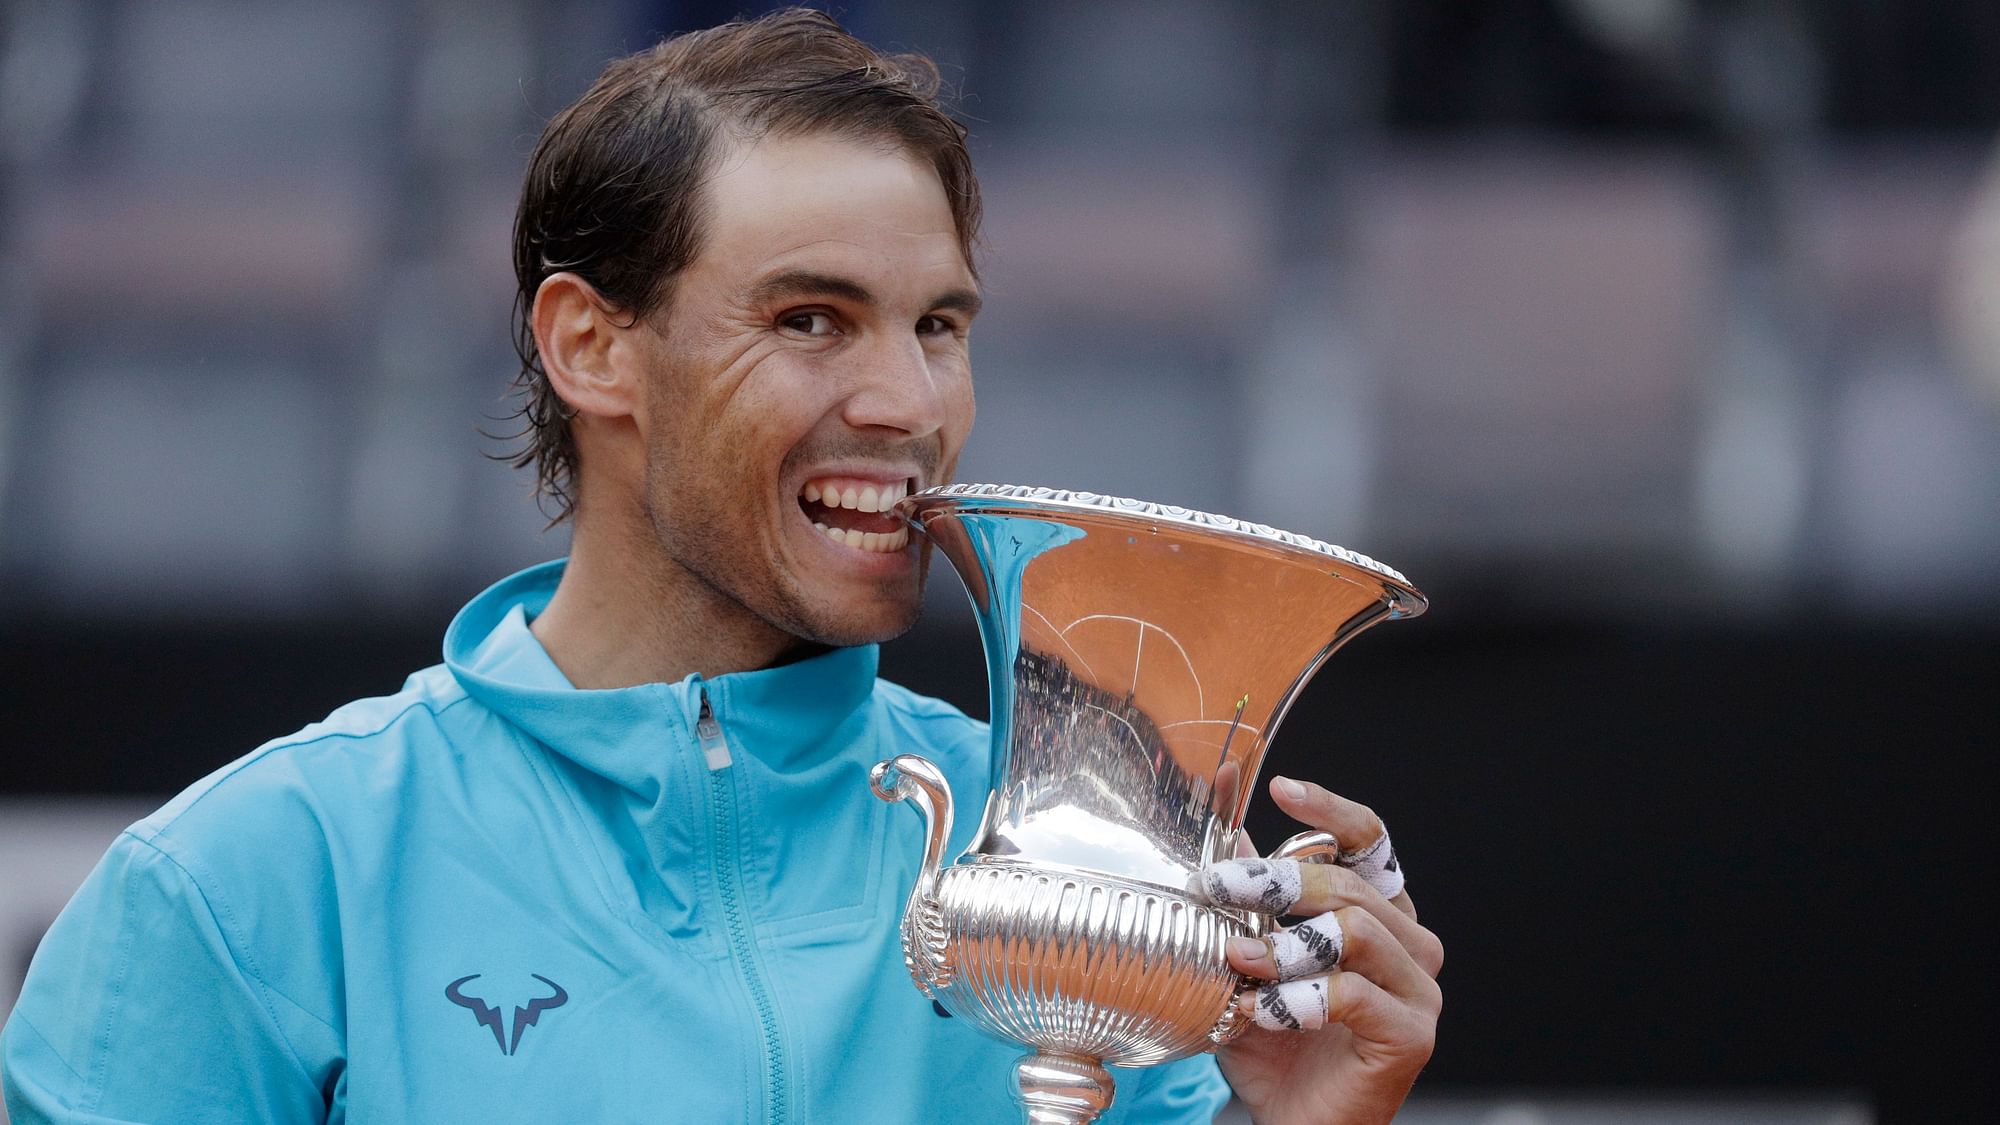 Nadal has now won nine trophies at the clay-court event in the Italian capital, a record in the history of the tournament.